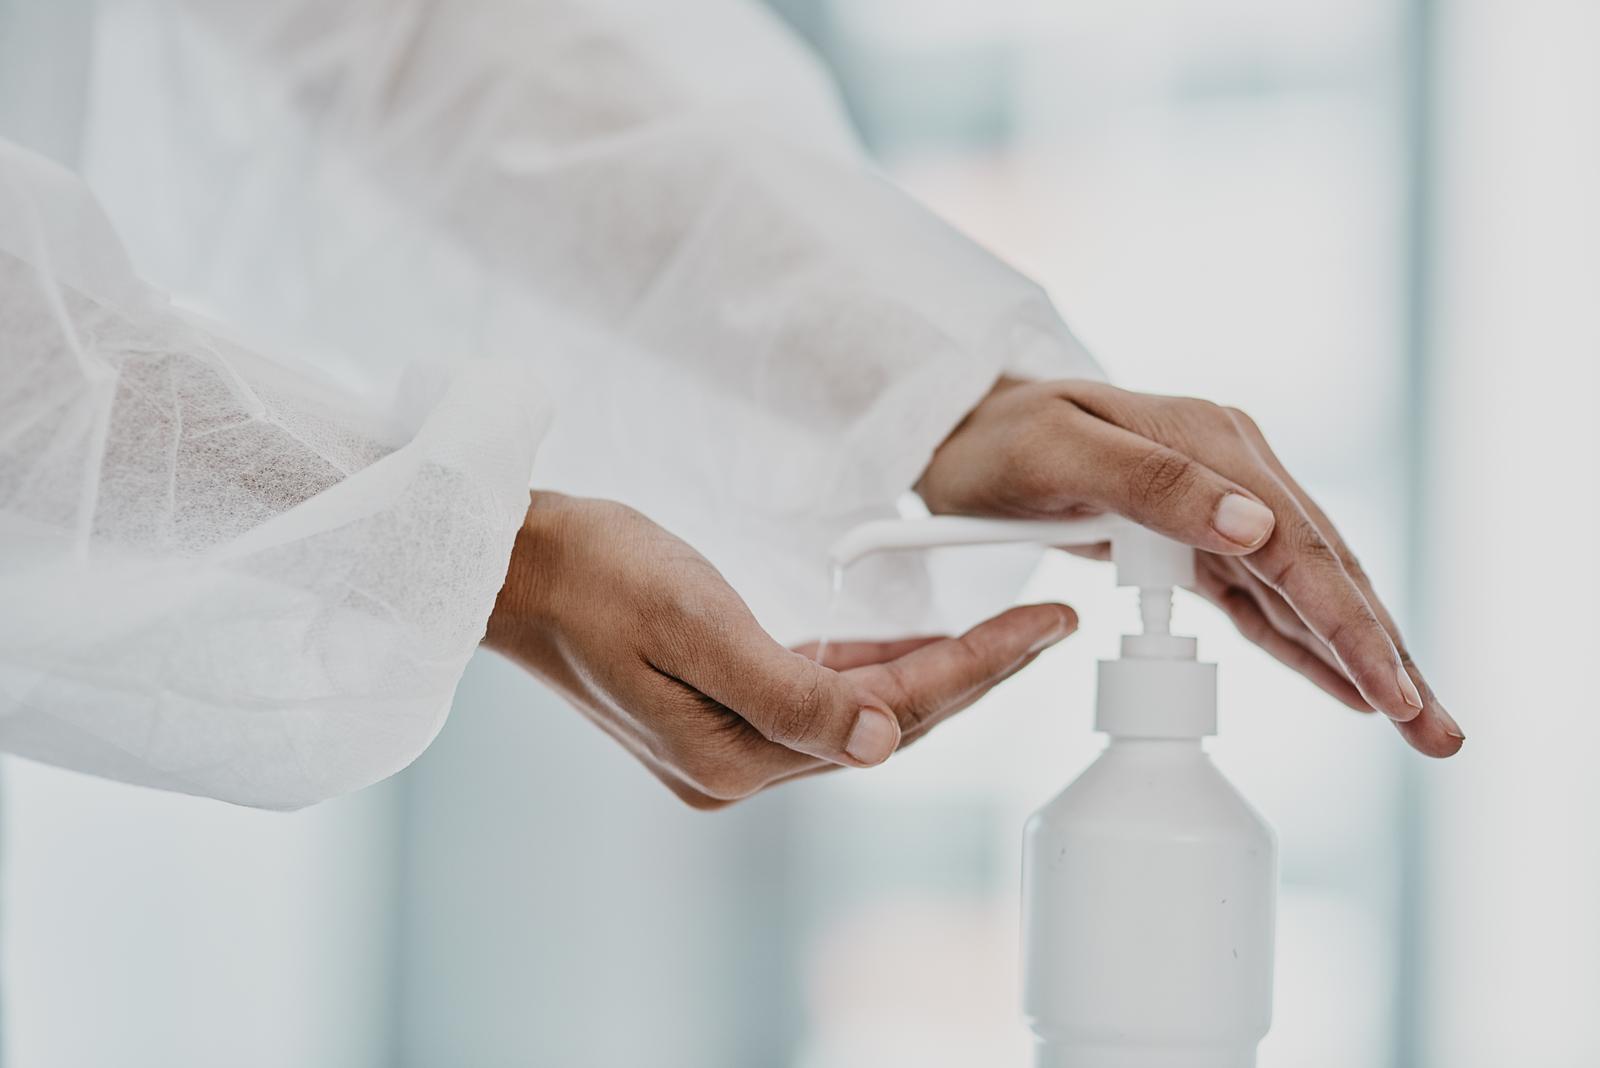 44297282_stay-sanitised-stay-safe-cropped-shot-of-a-healthcare-worker-disinfecting-herself-with-hand-sanitiser.jpg